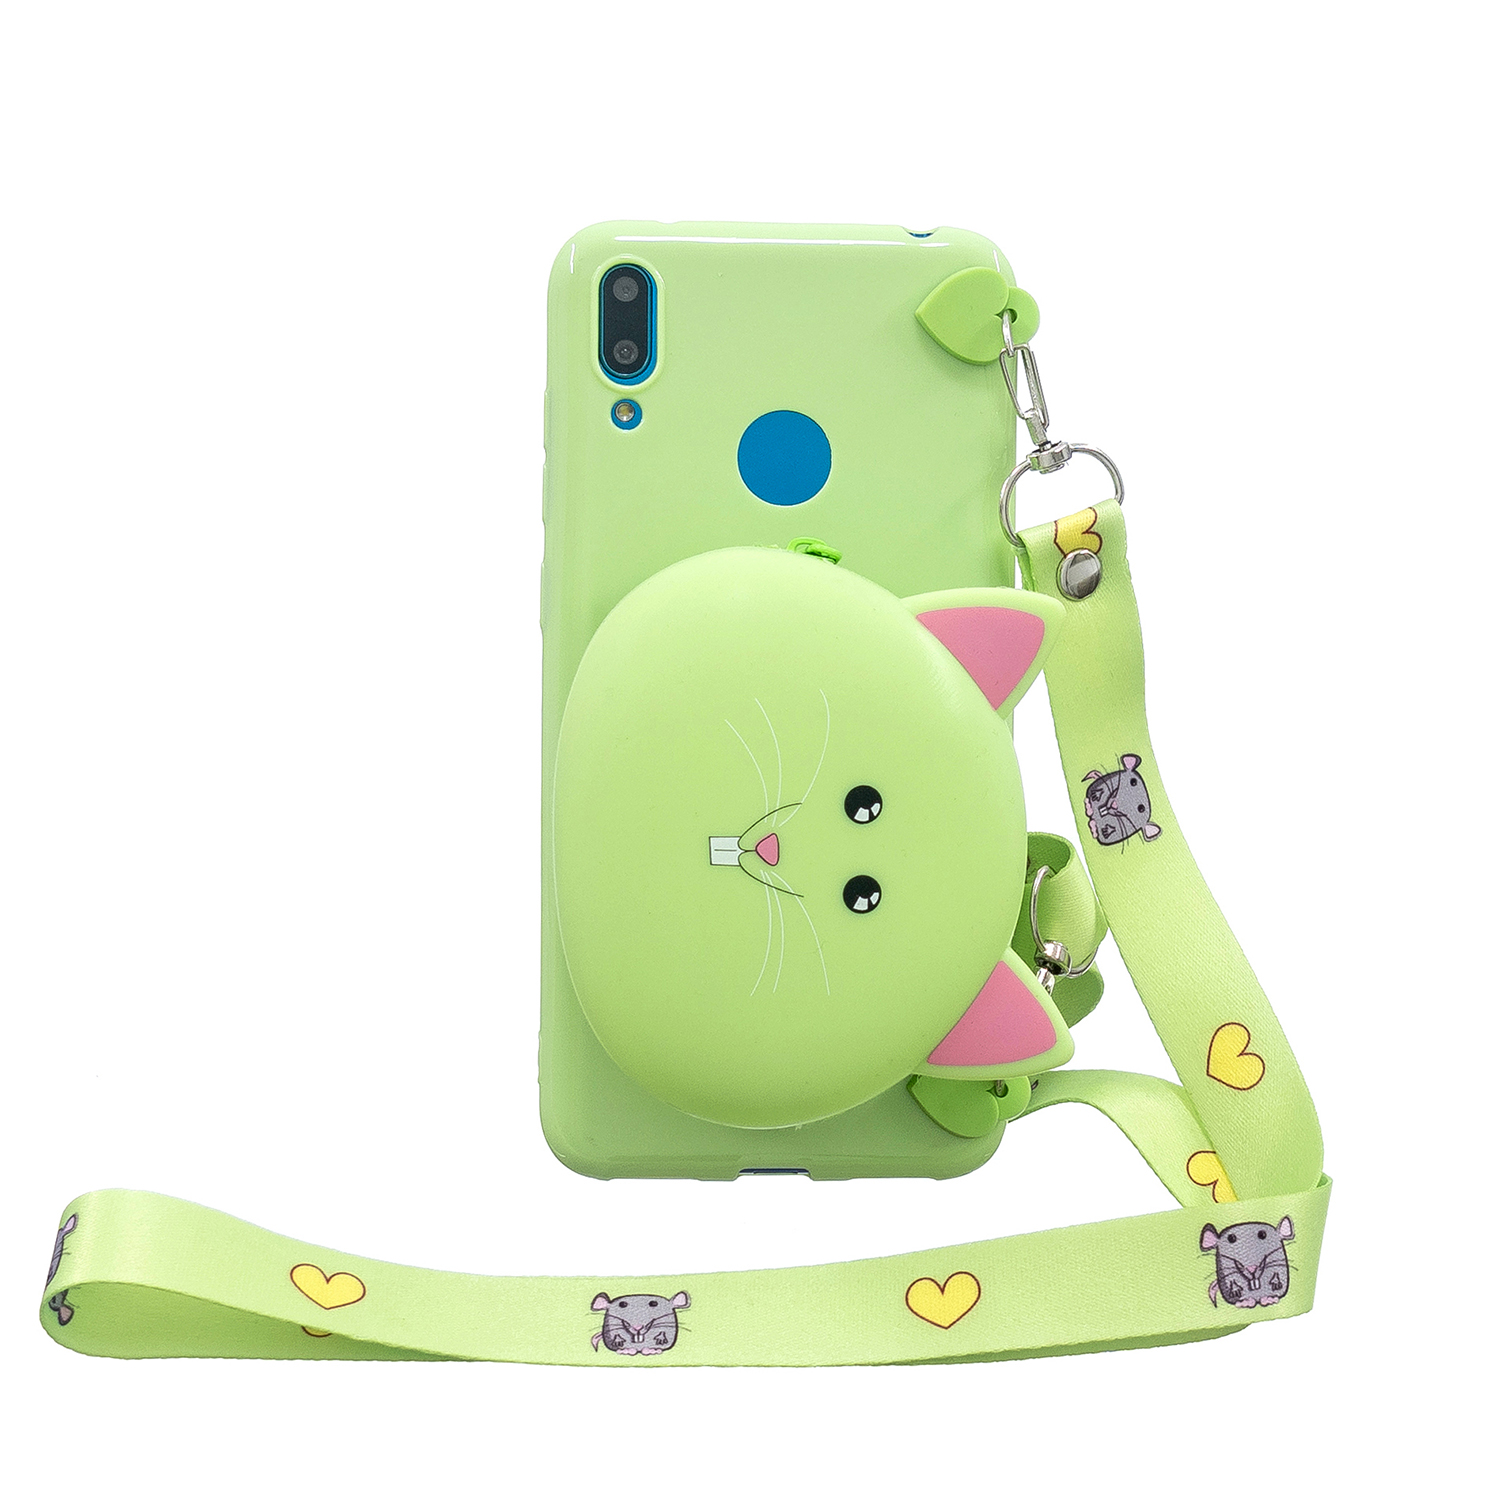 For HUAWEI Y6/Y7 Prime 2019 Cellphone Case Mobile Phone Shell Shockproof TPU Cover with Cartoon Cat Pig Panda Coin Purse Lovely Shoulder Starp  Green